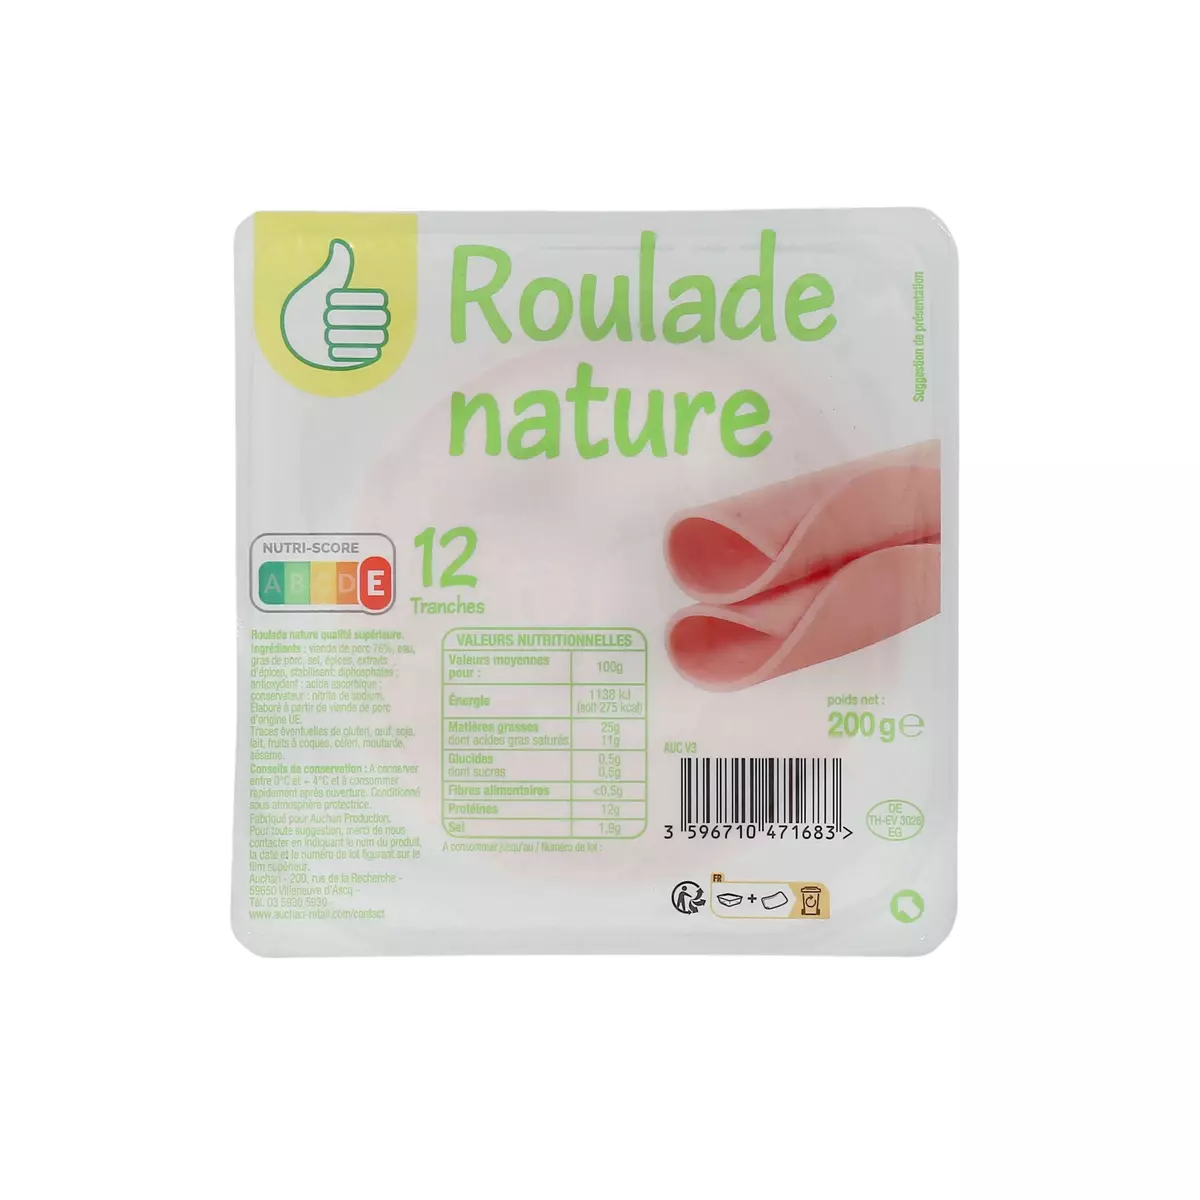 POUCE Roulade nature 12 tranches 200g